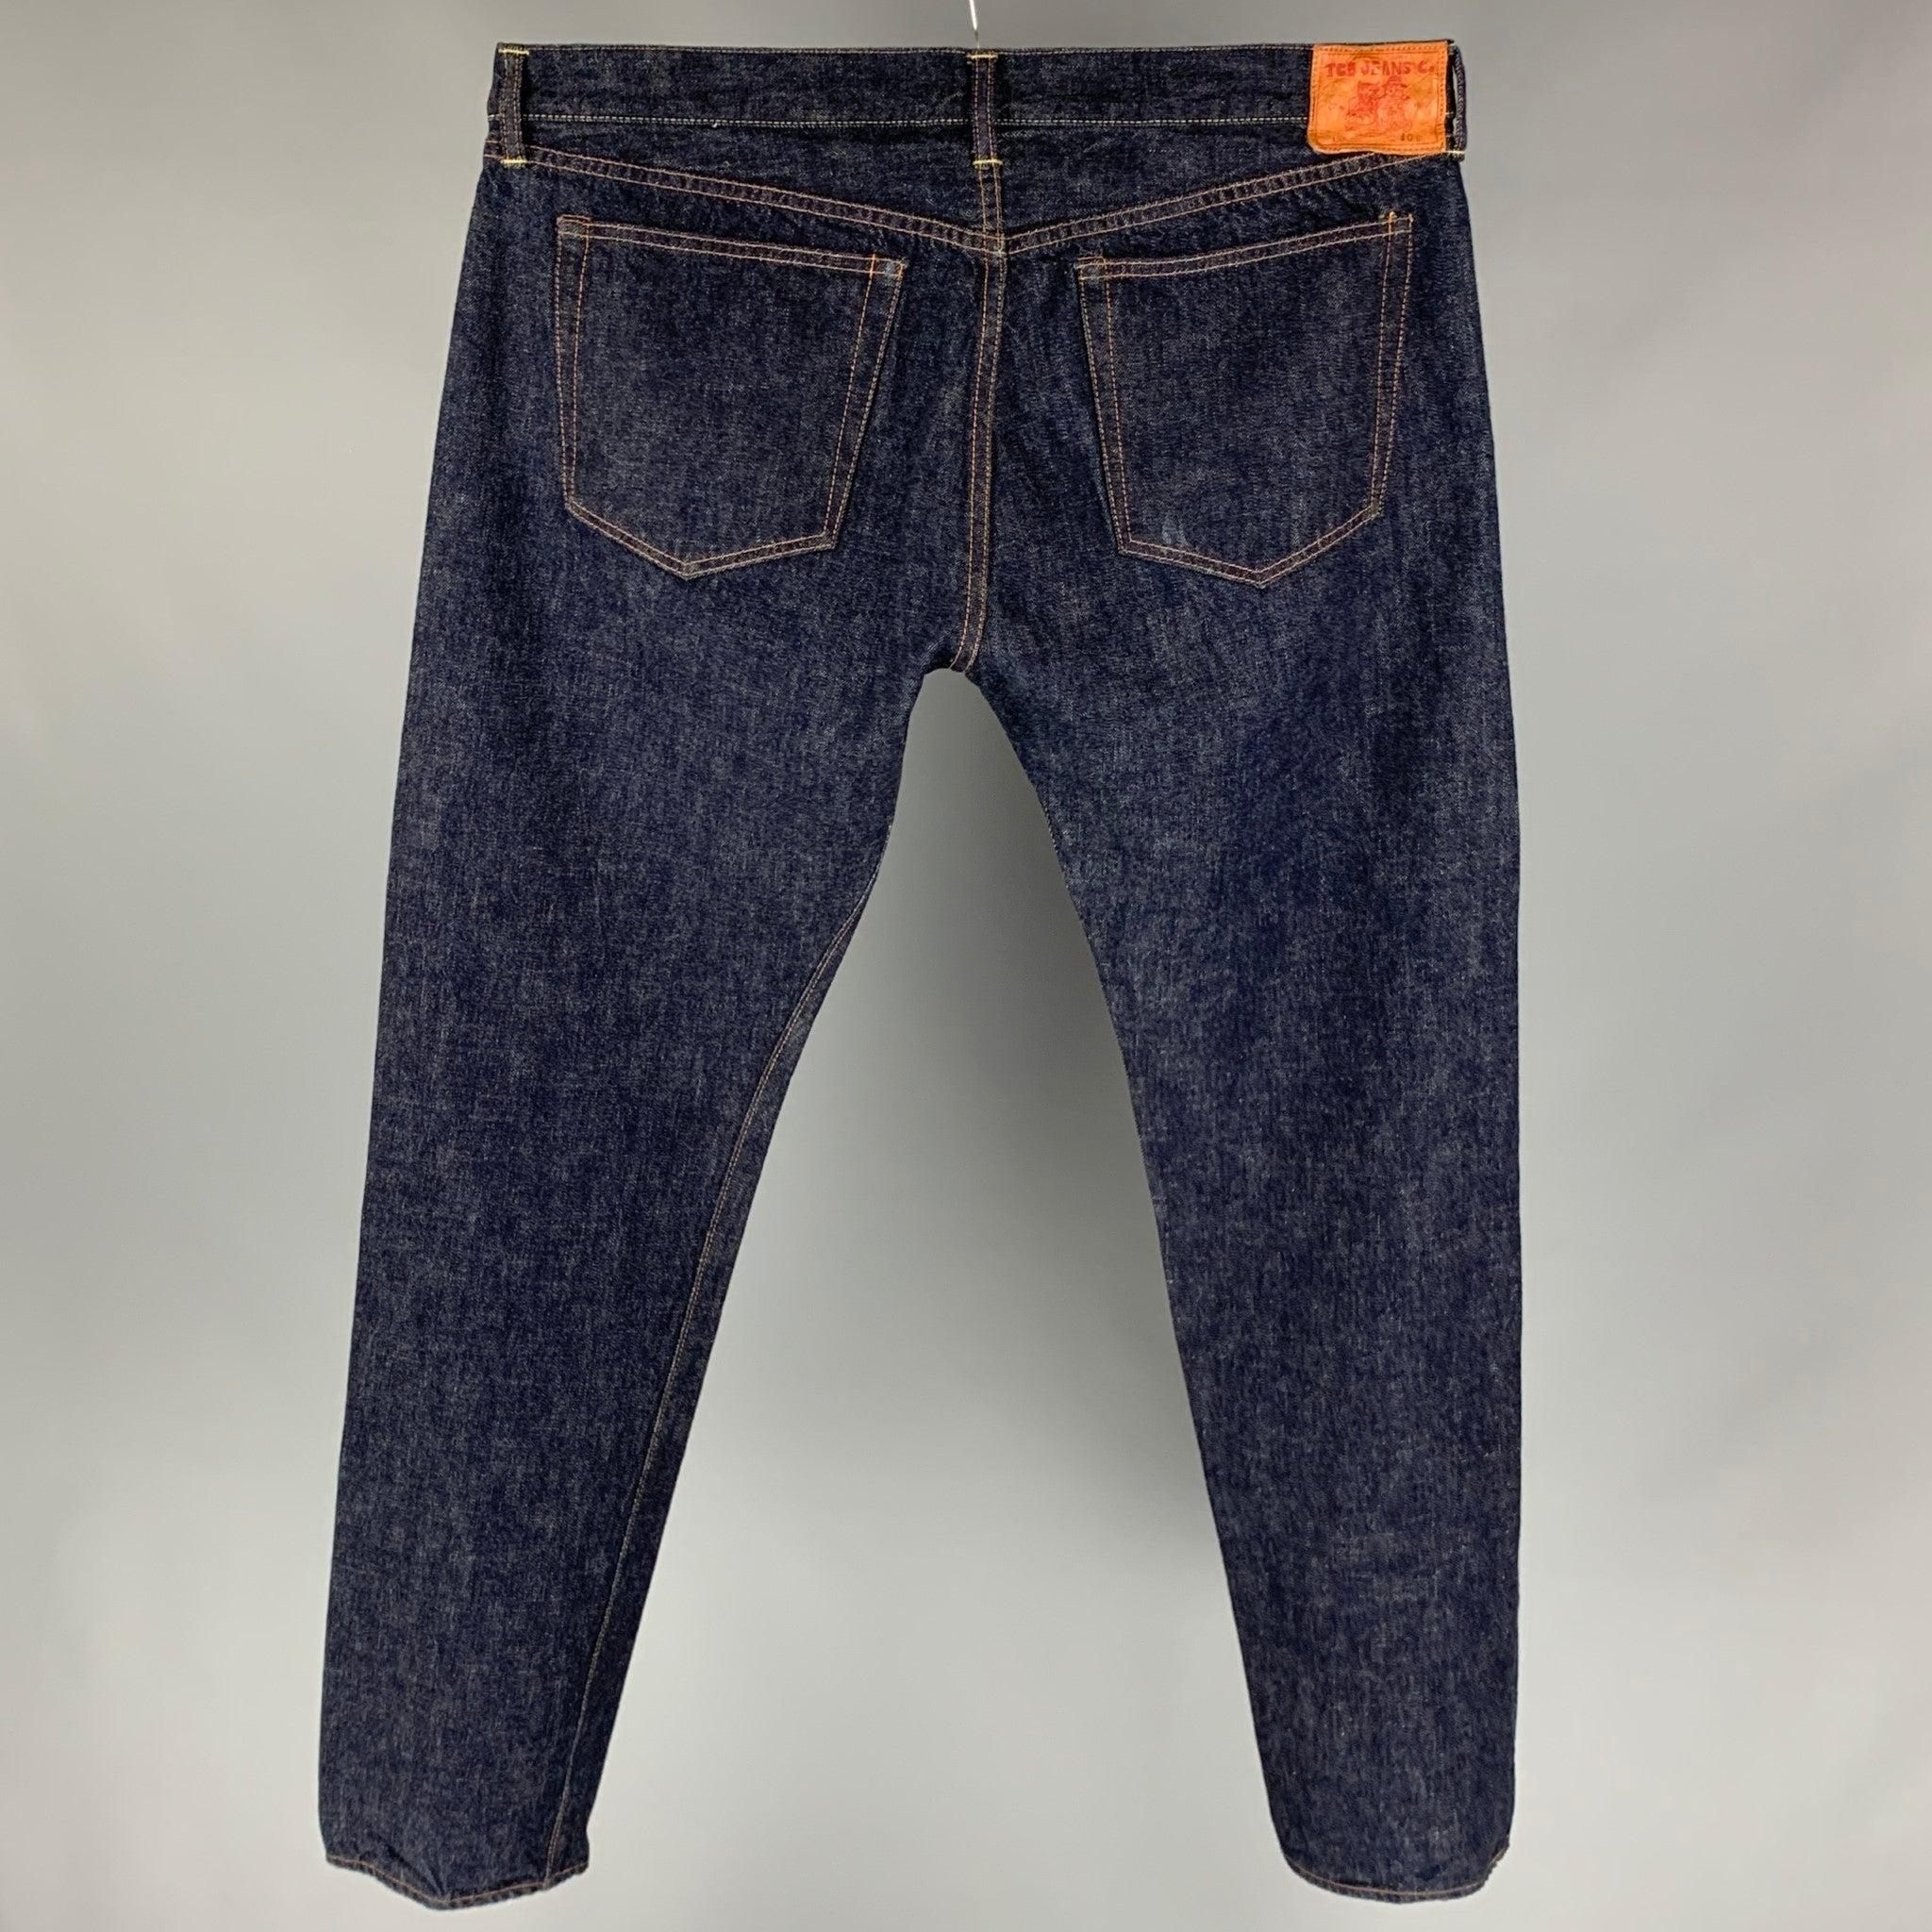 TCB Jeans pants comes in a indigo selvedge denim featuring a straight leg, contrast stitching, button fly closure. Made in Japan.
Very Good
Pre-Owned Condition. 

Marked:   Size tag removed.  

Measurements: 
  Waist: 38 inches  Rise: 10.5 inches 